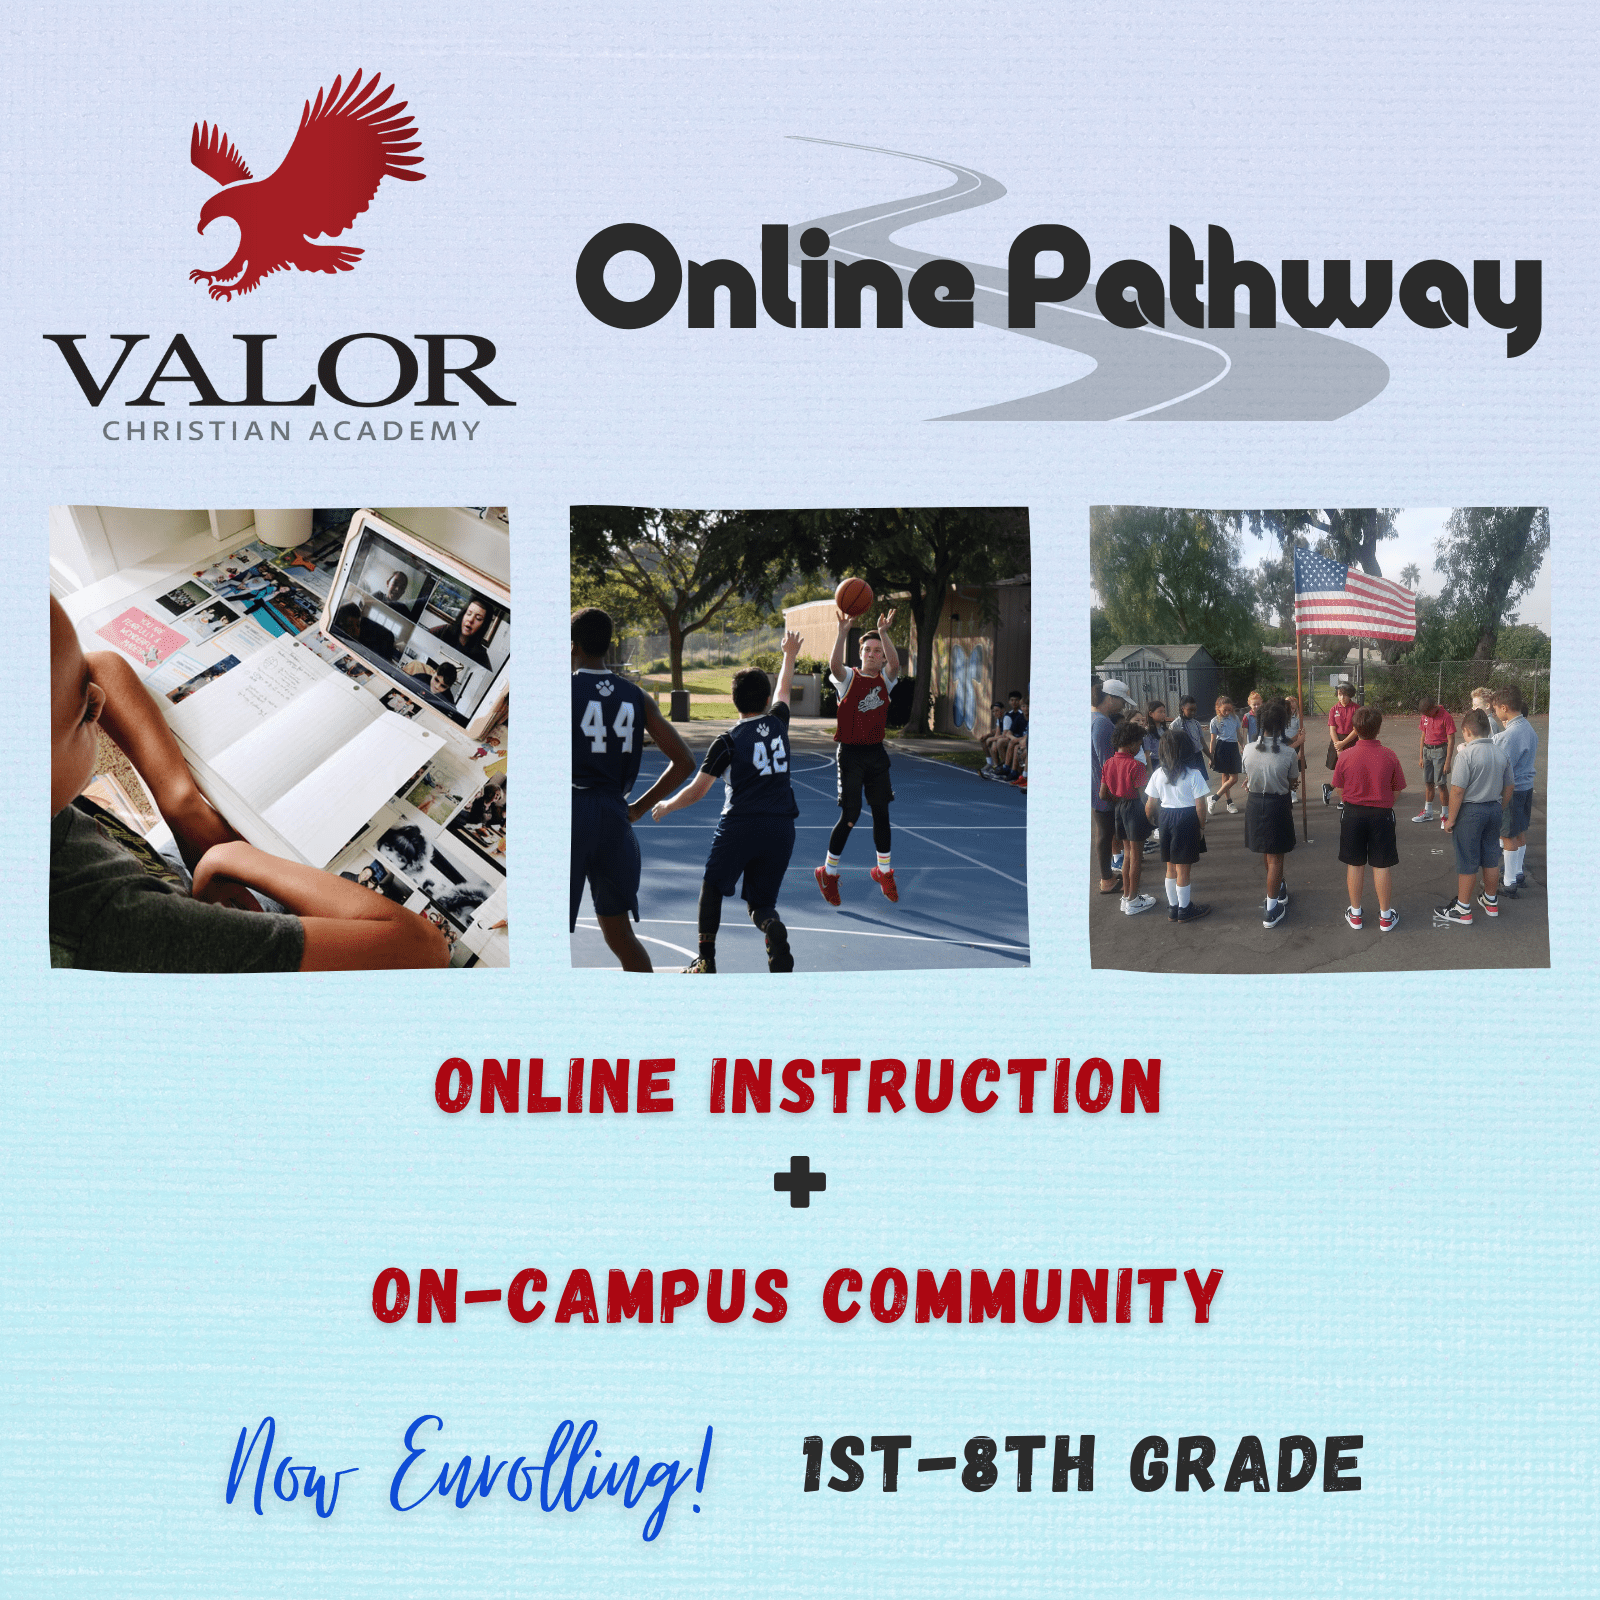 Valor Christian Online Pathway is now enrolling k-8th grade